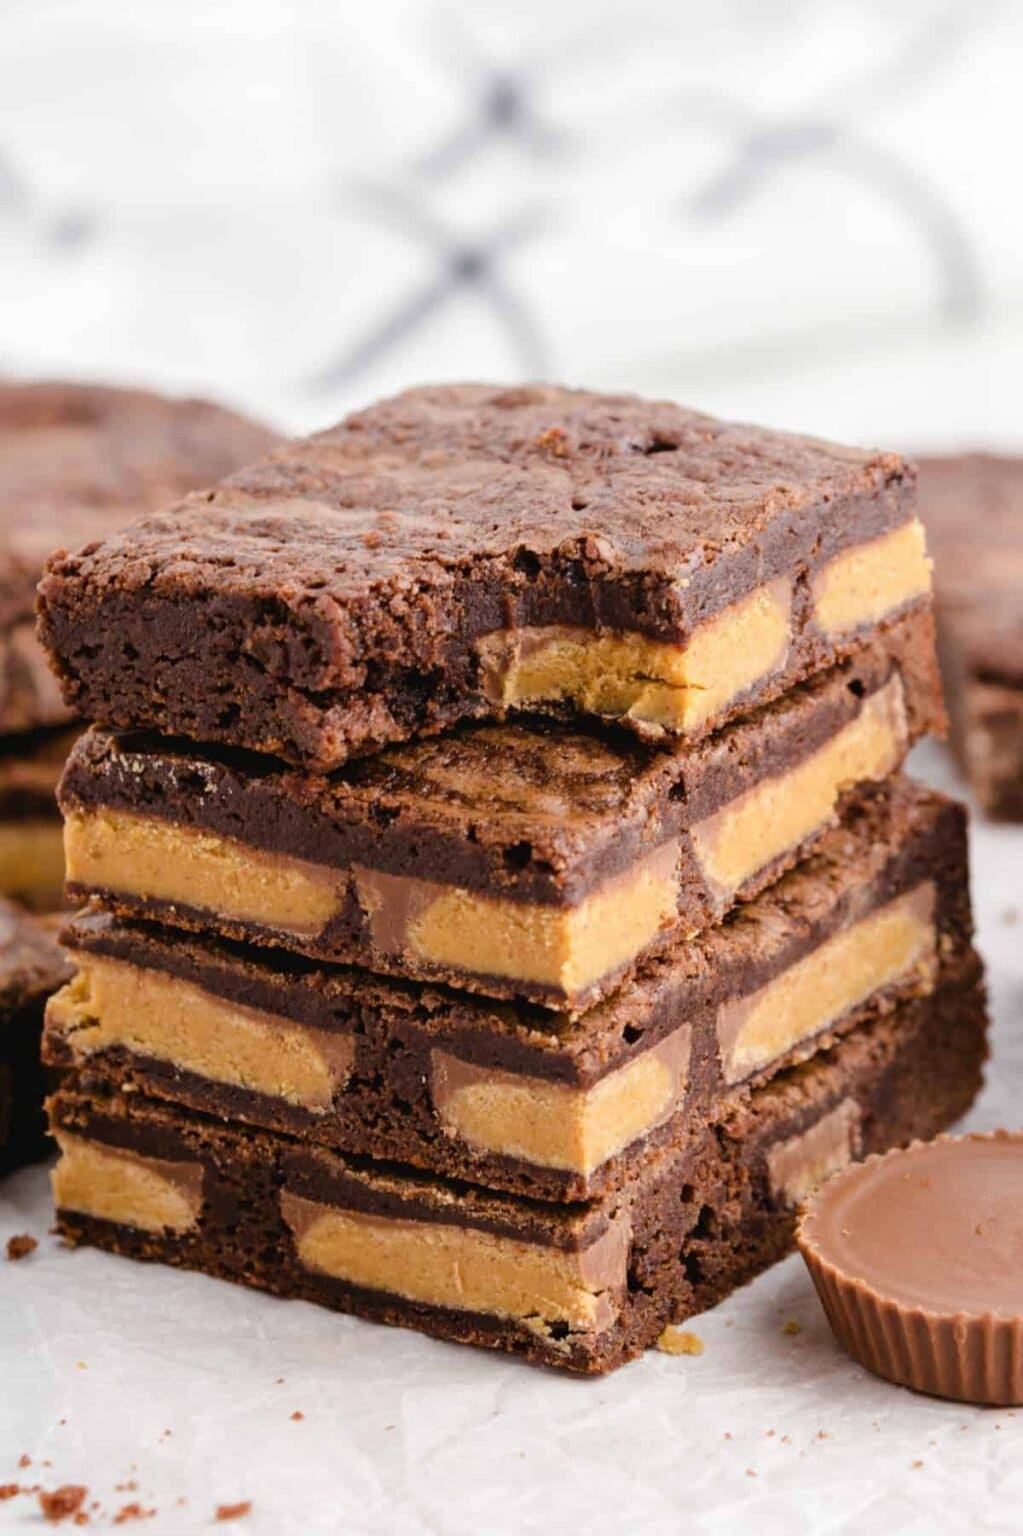 Peanut Butter Cup Brownies (Our Homemade Brownie Recipe Or Box Mix)